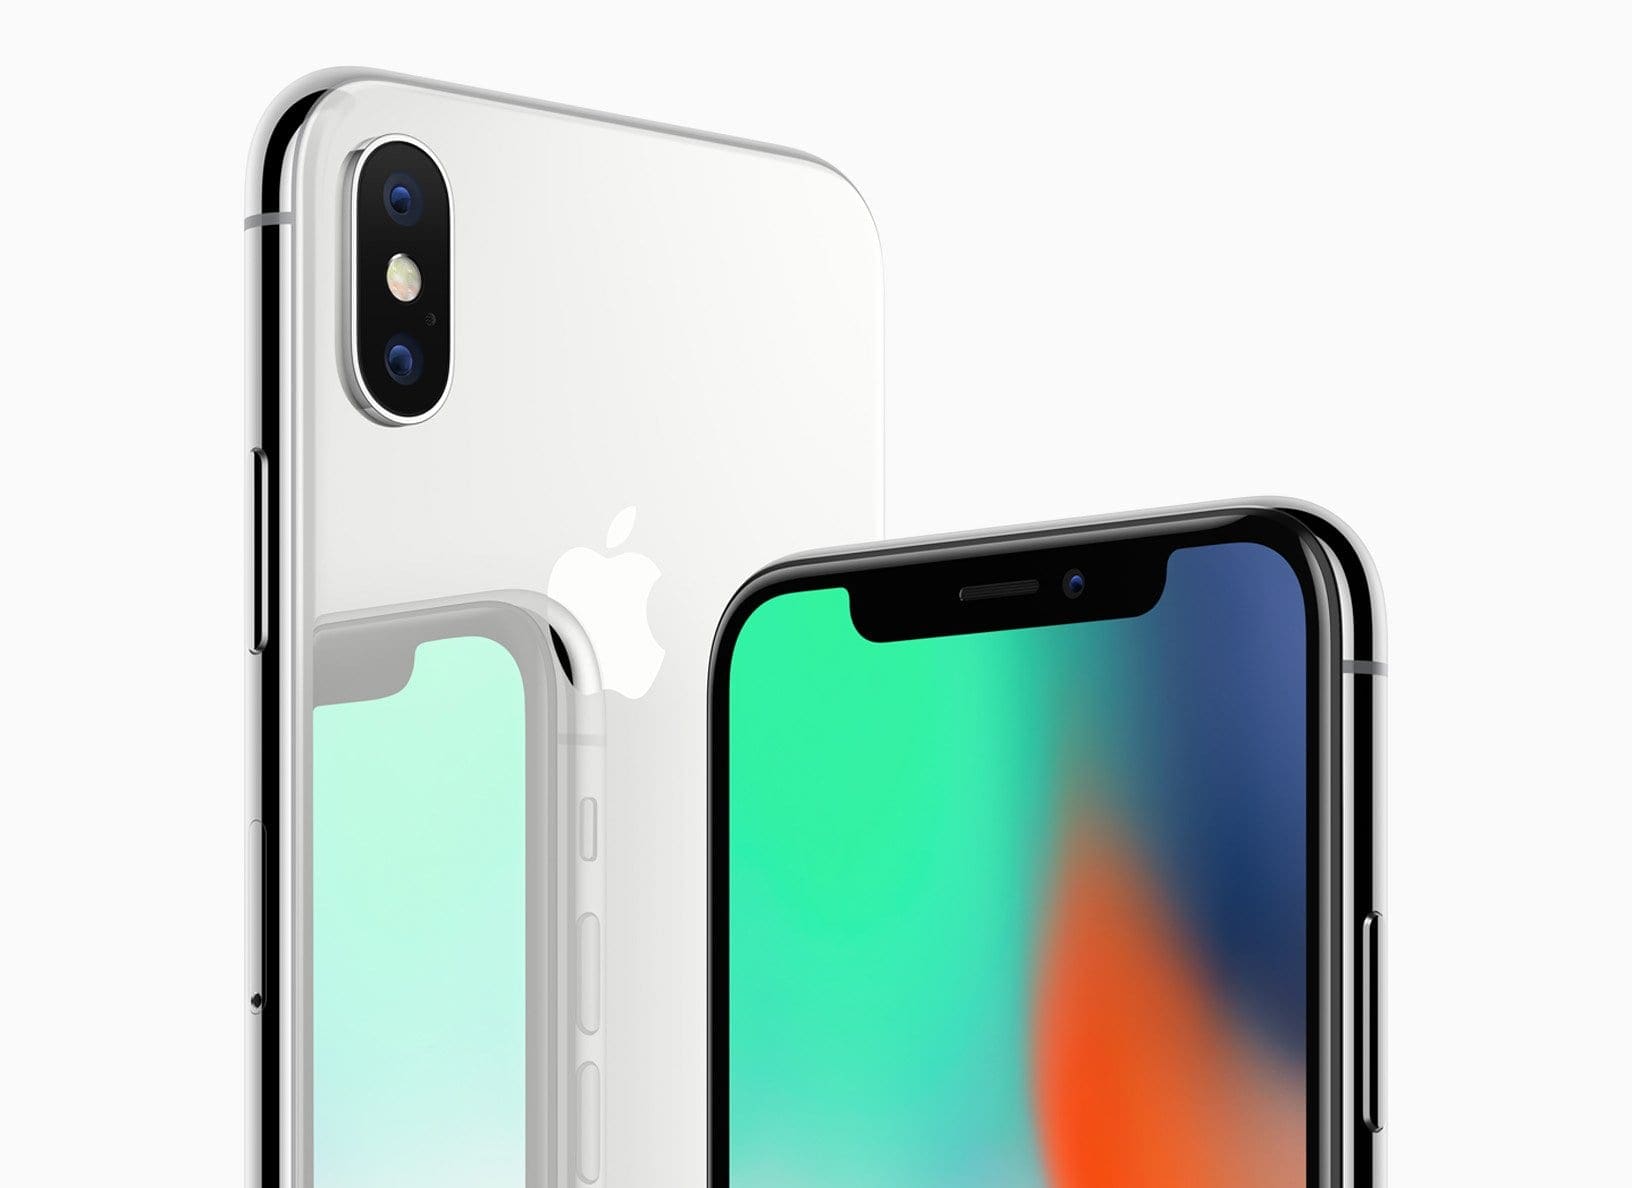 Exclusive: Apple\u002639;s 2018 iPhone XS, iPhone XS Plus, and iPhone 9 Detailed  AppleToolBox